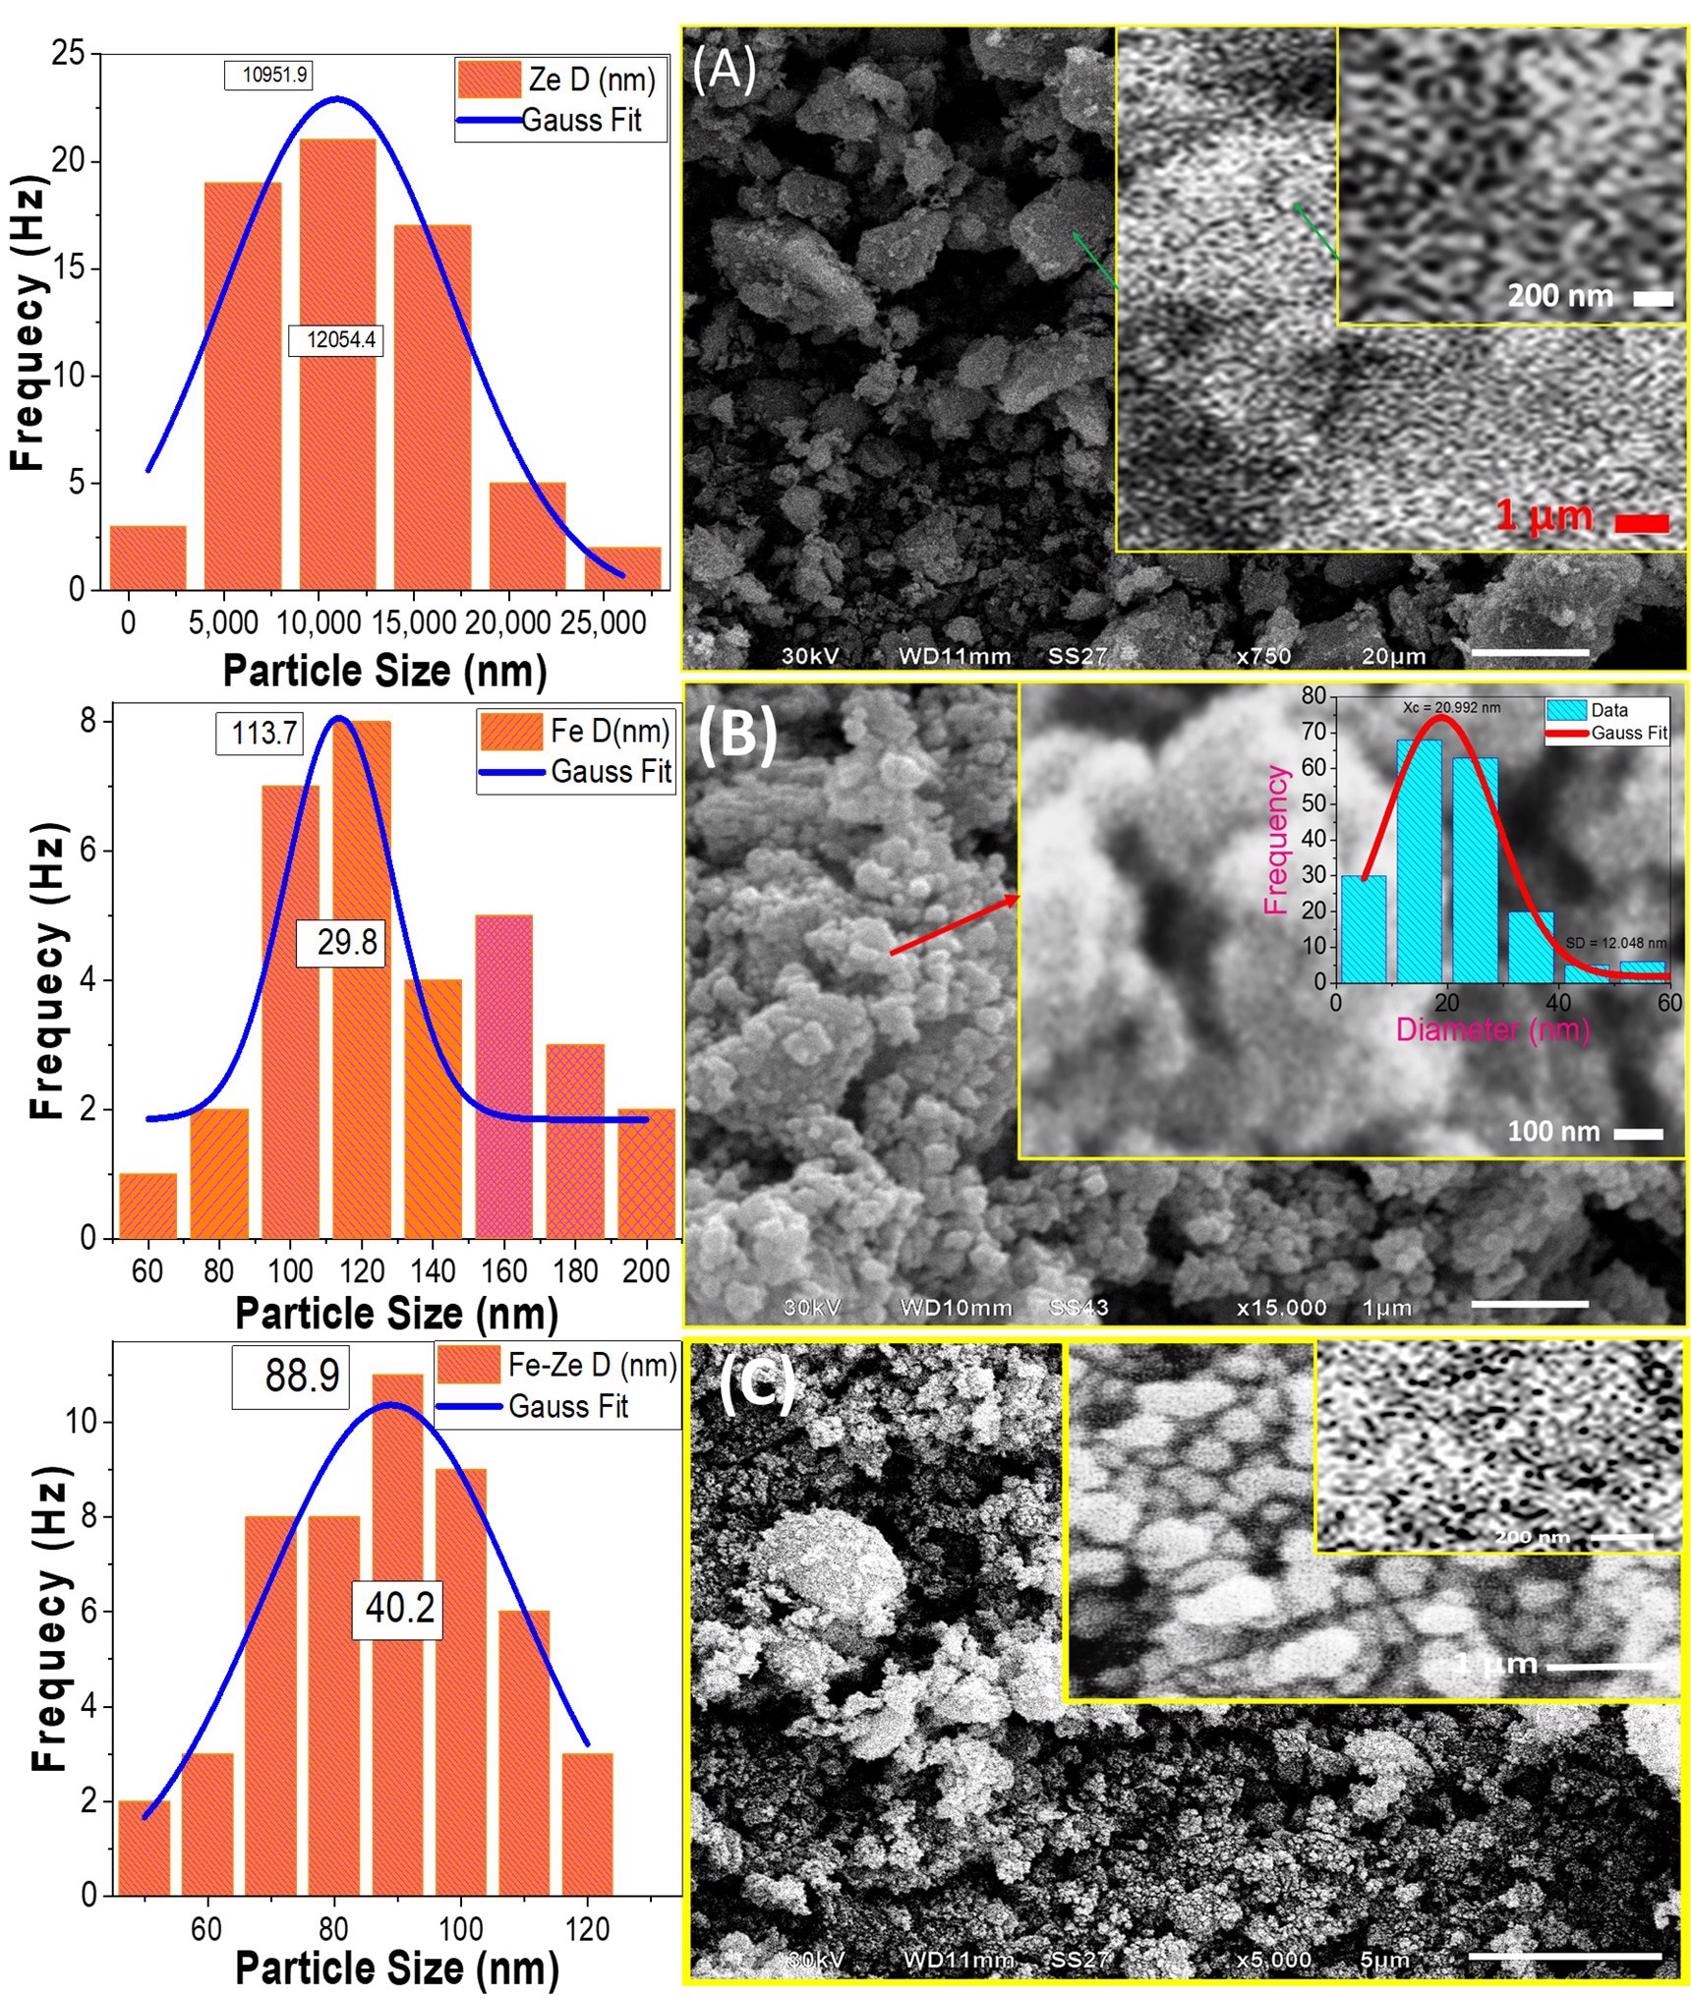 SEM micrographs and the corresponding particle size distribution for (A) natural zeolite, (B) Fe2O3, and (C) Fe2O3/zeolite. The inset of (B) shows the pore diameter distribution.